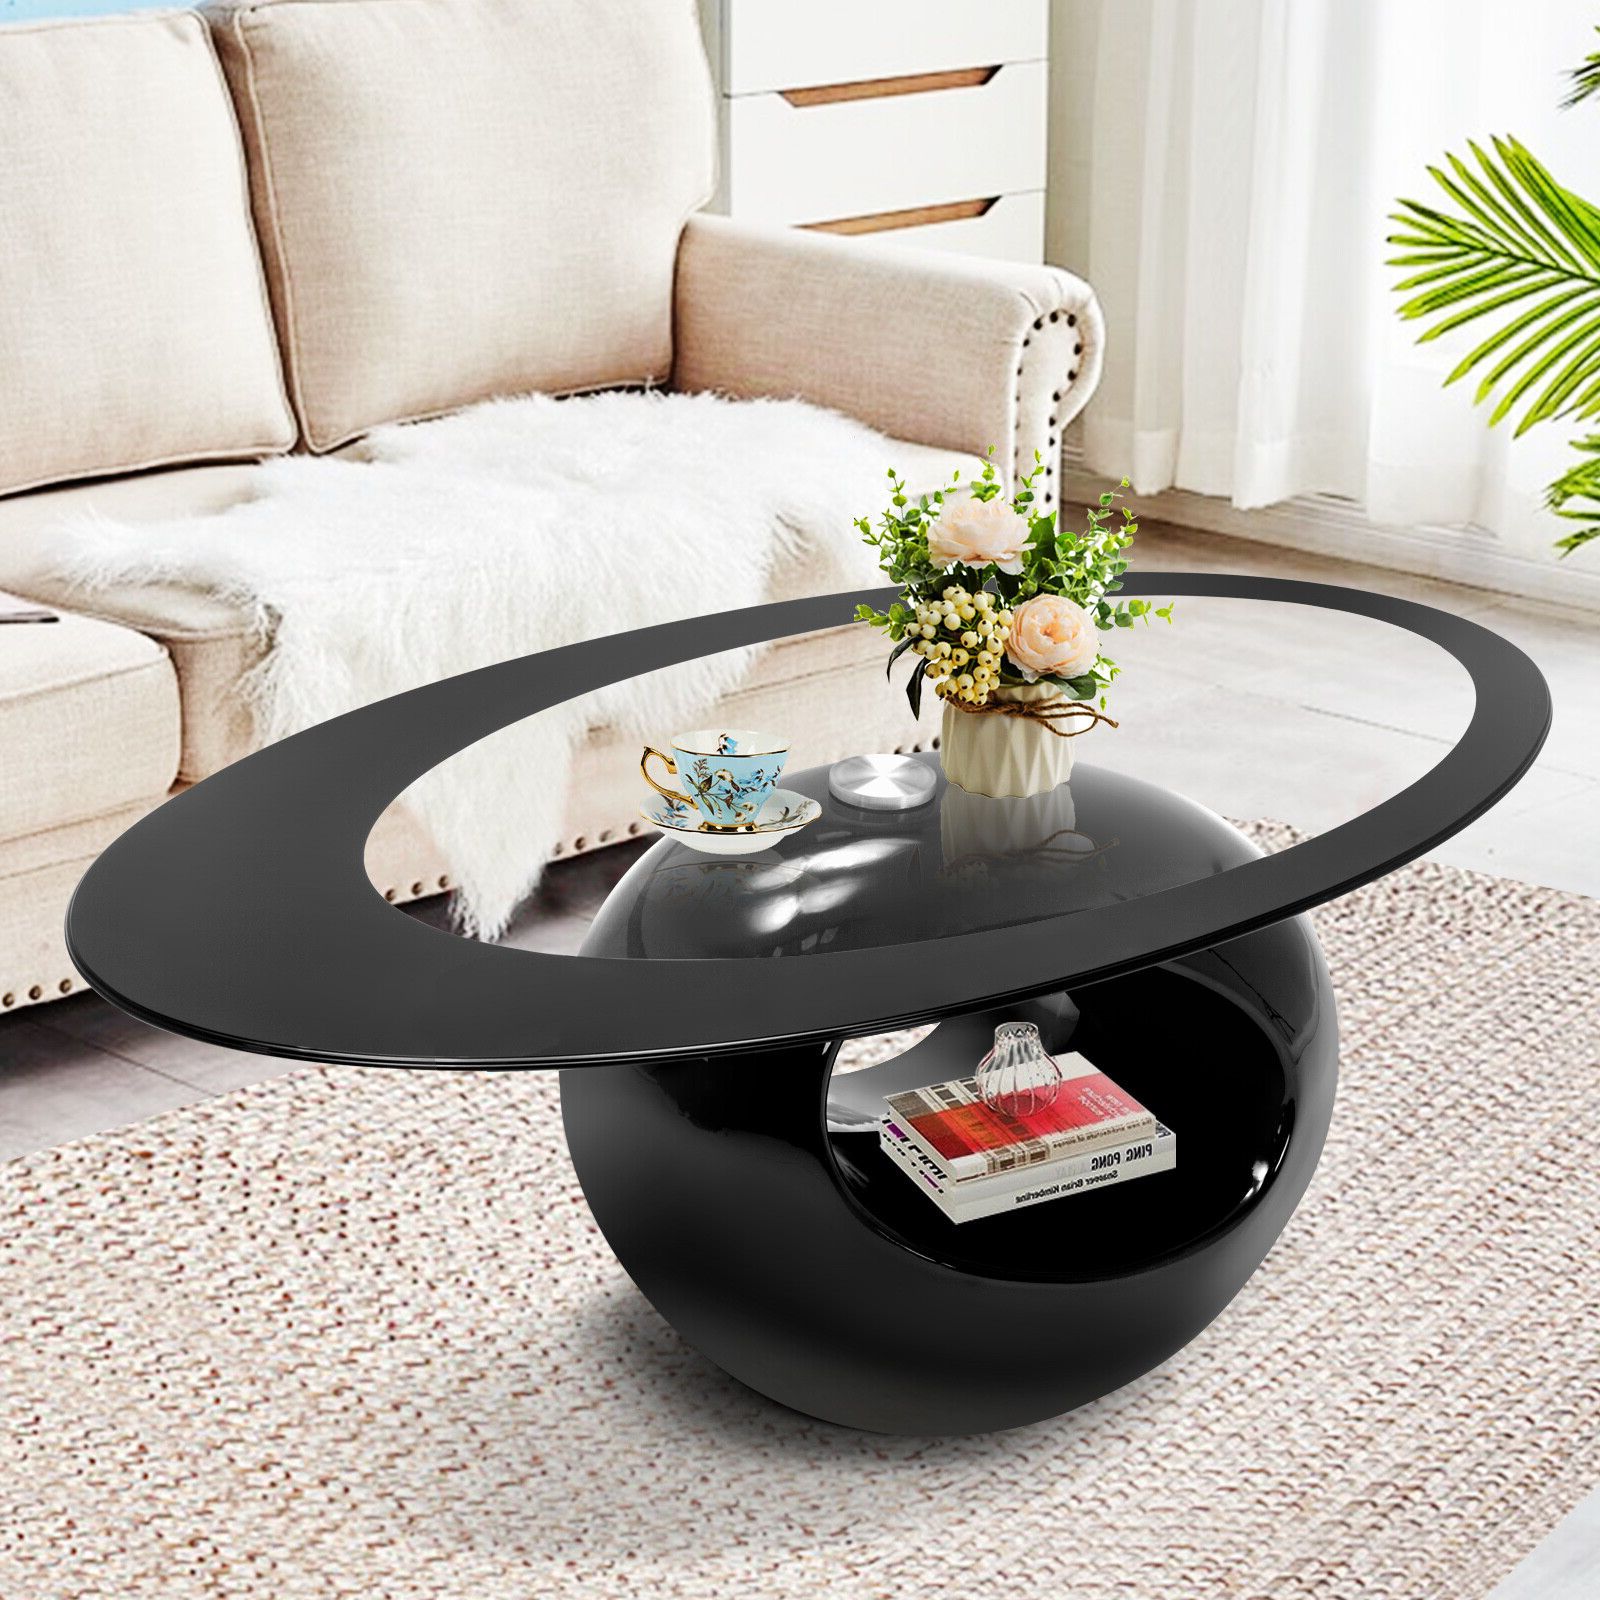 Current Oval Glass Coffee Tables Intended For Minimalistic Black High Gloss Oval Glass Coffee Table Hollow Storage Living  Room (View 8 of 10)